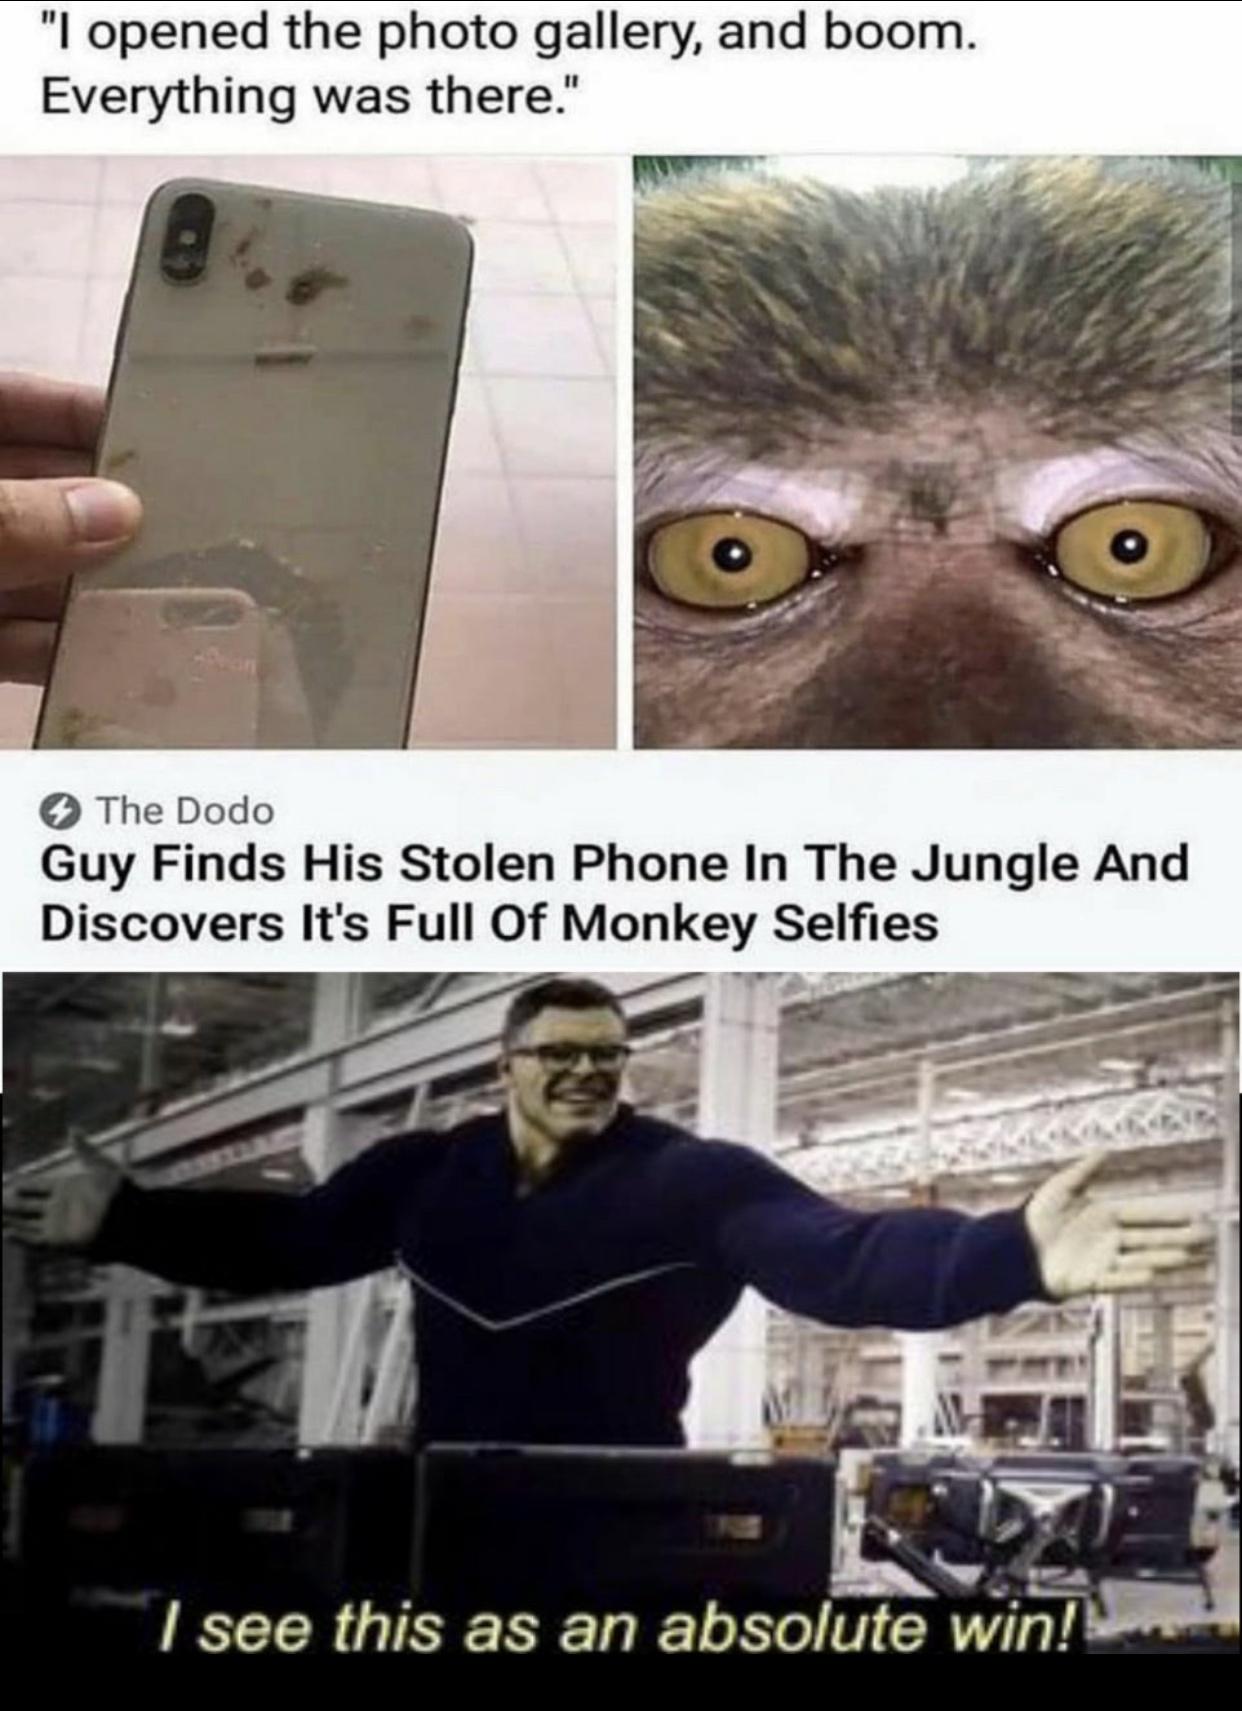 carefully he's a hero meme - "I opened the photo gallery, and boom. Everything was there." Son The Dodo Guy Finds His Stolen Phone In The Jungle And Discovers It's Full Of Monkey Selfies I see this as an absolute win!